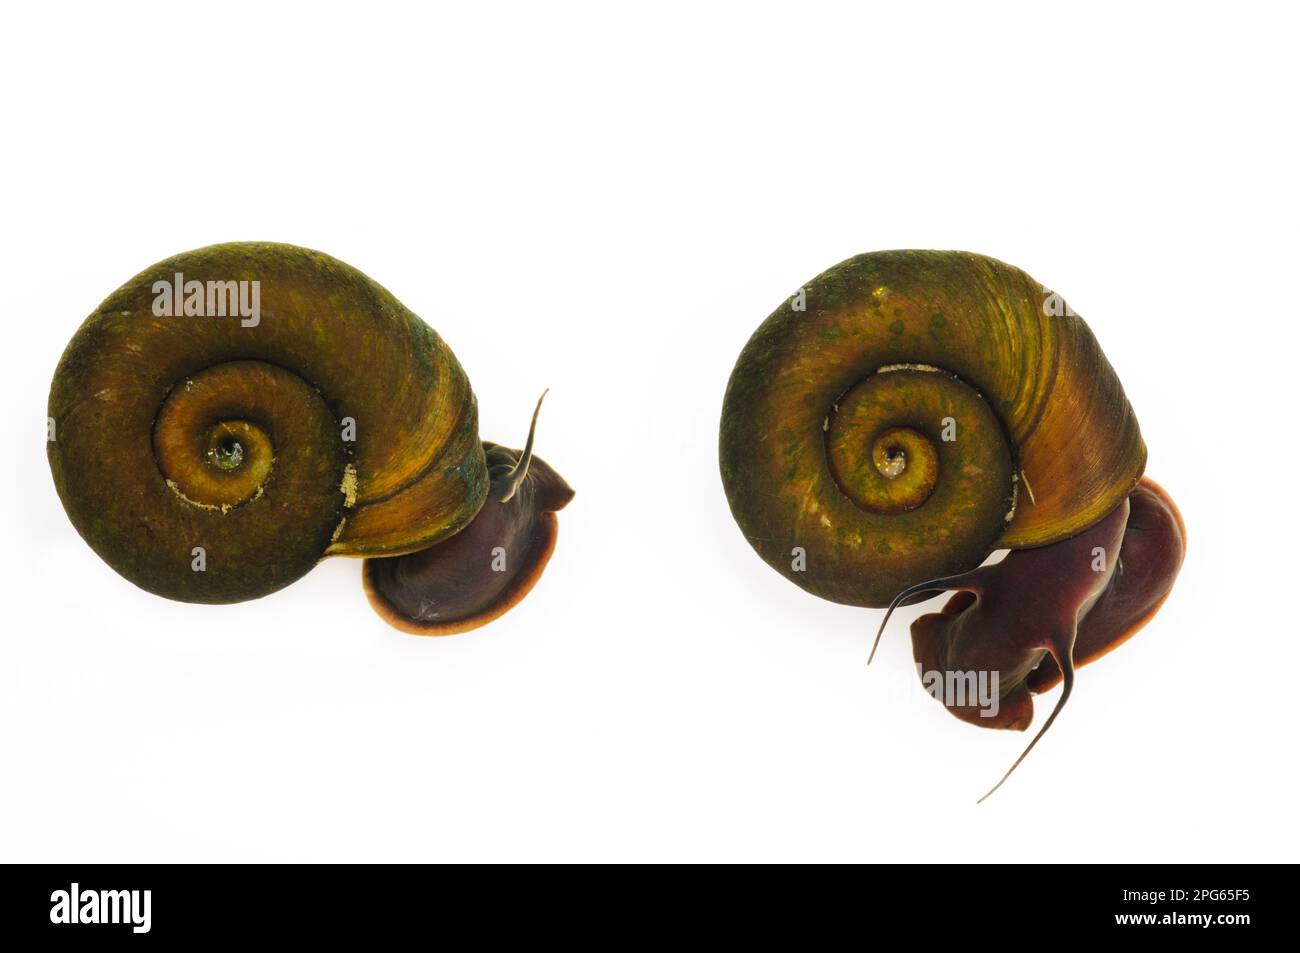 Ram's horn snail (Planorbis planorbis) two adults, Wat Tyler Country Park, Essex, England, July (photographed in the special photo tank and Stock Photo